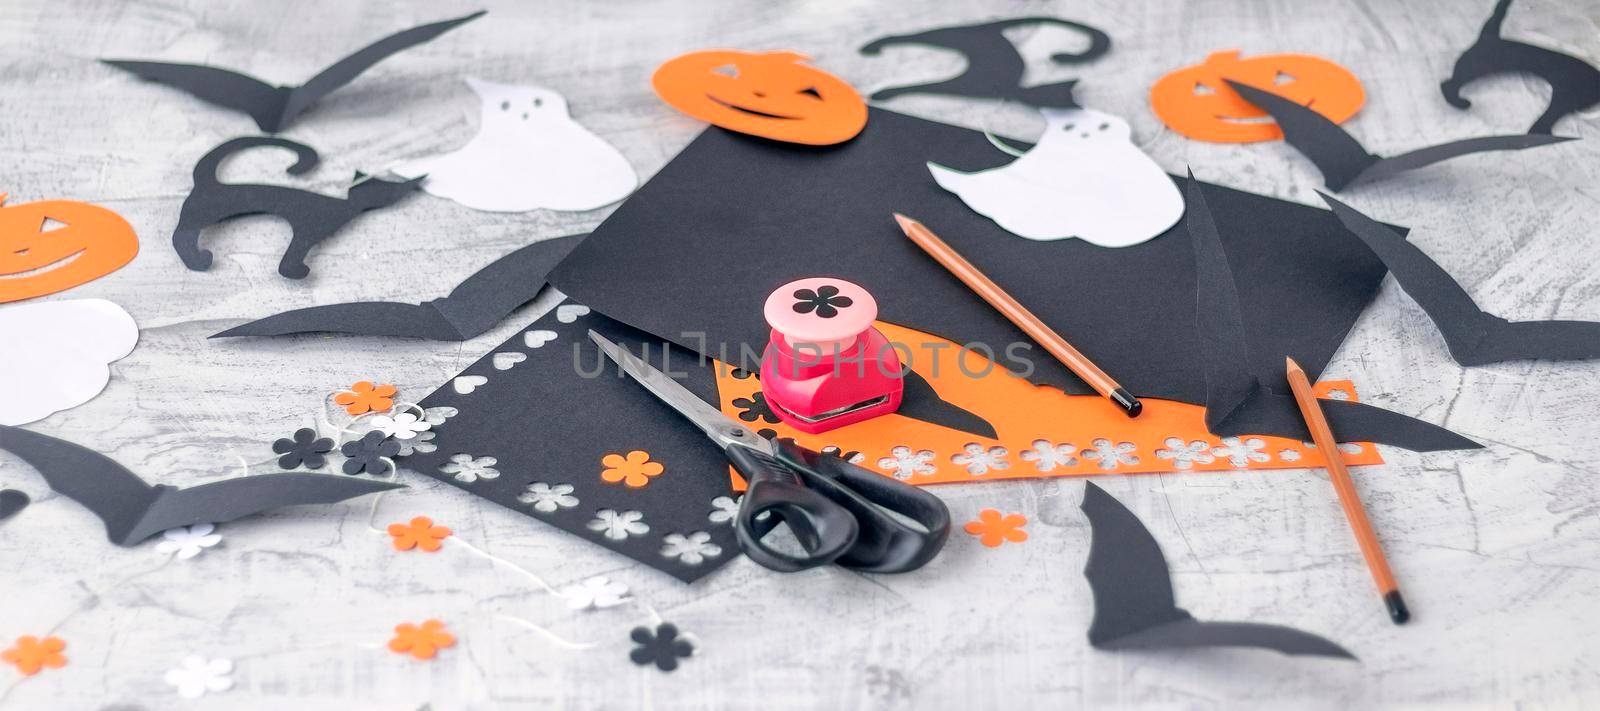 banner with Preparation for Halloween Decoration for the holidays, cutting from colored paper on a white brick wall. orange and black colored paper, scissors, pencils, figured hole punch by Leoschka